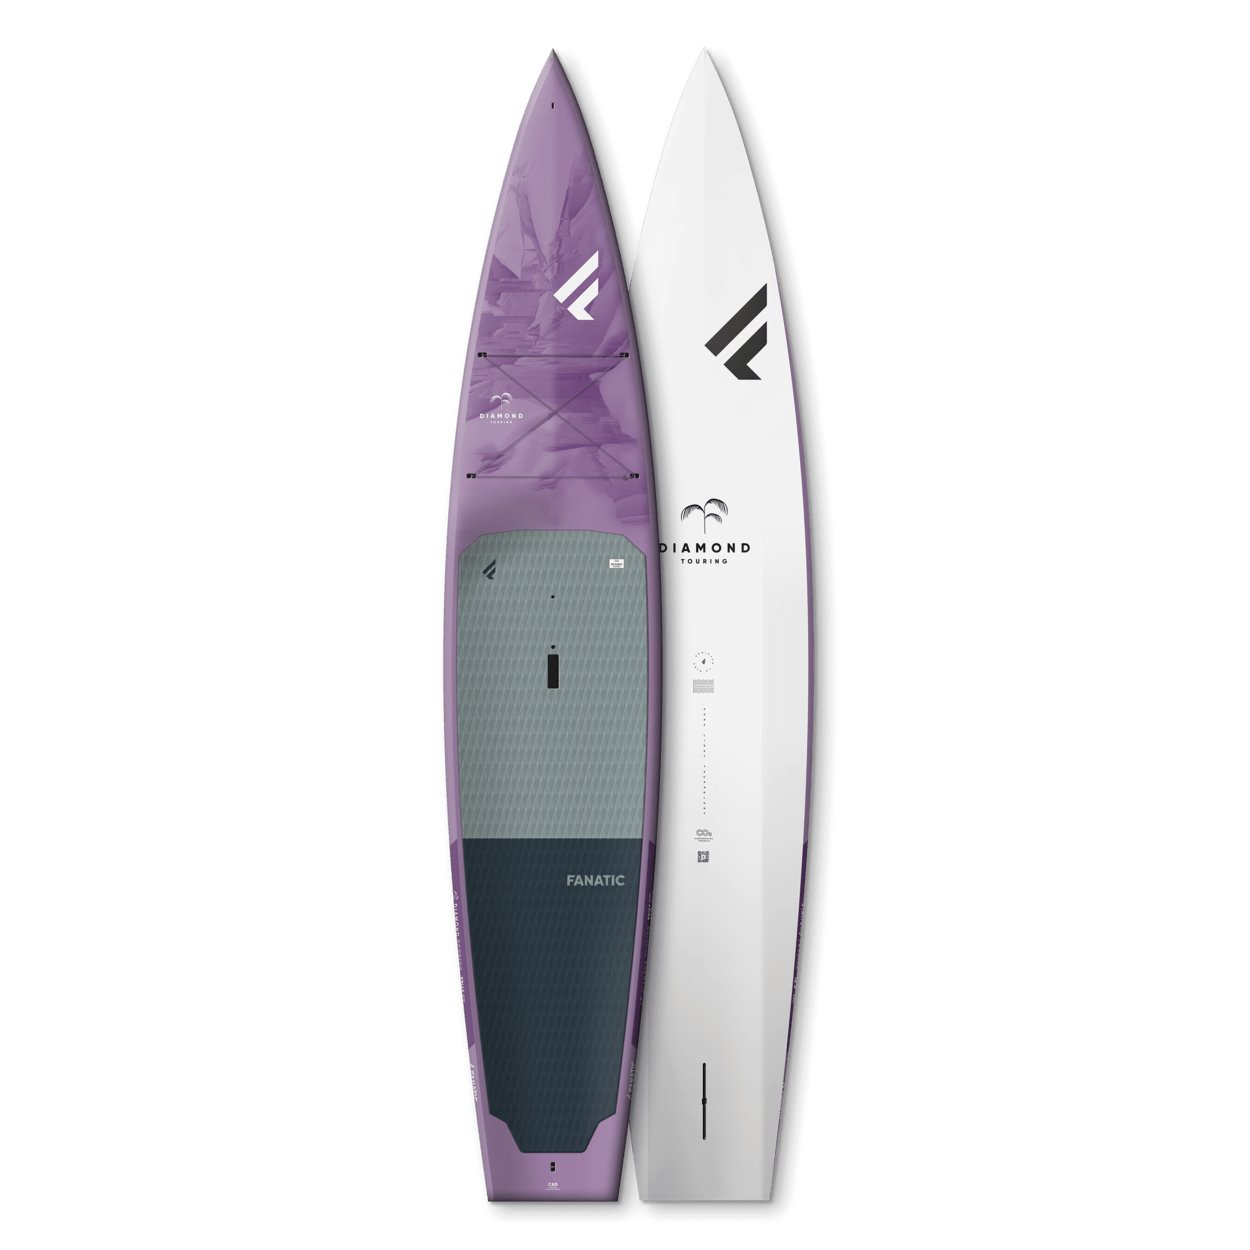 Fanatic Diamond Touring 2023 - Worthing Watersports - 9010583133850 - SUP Composite - Fanatic SUP